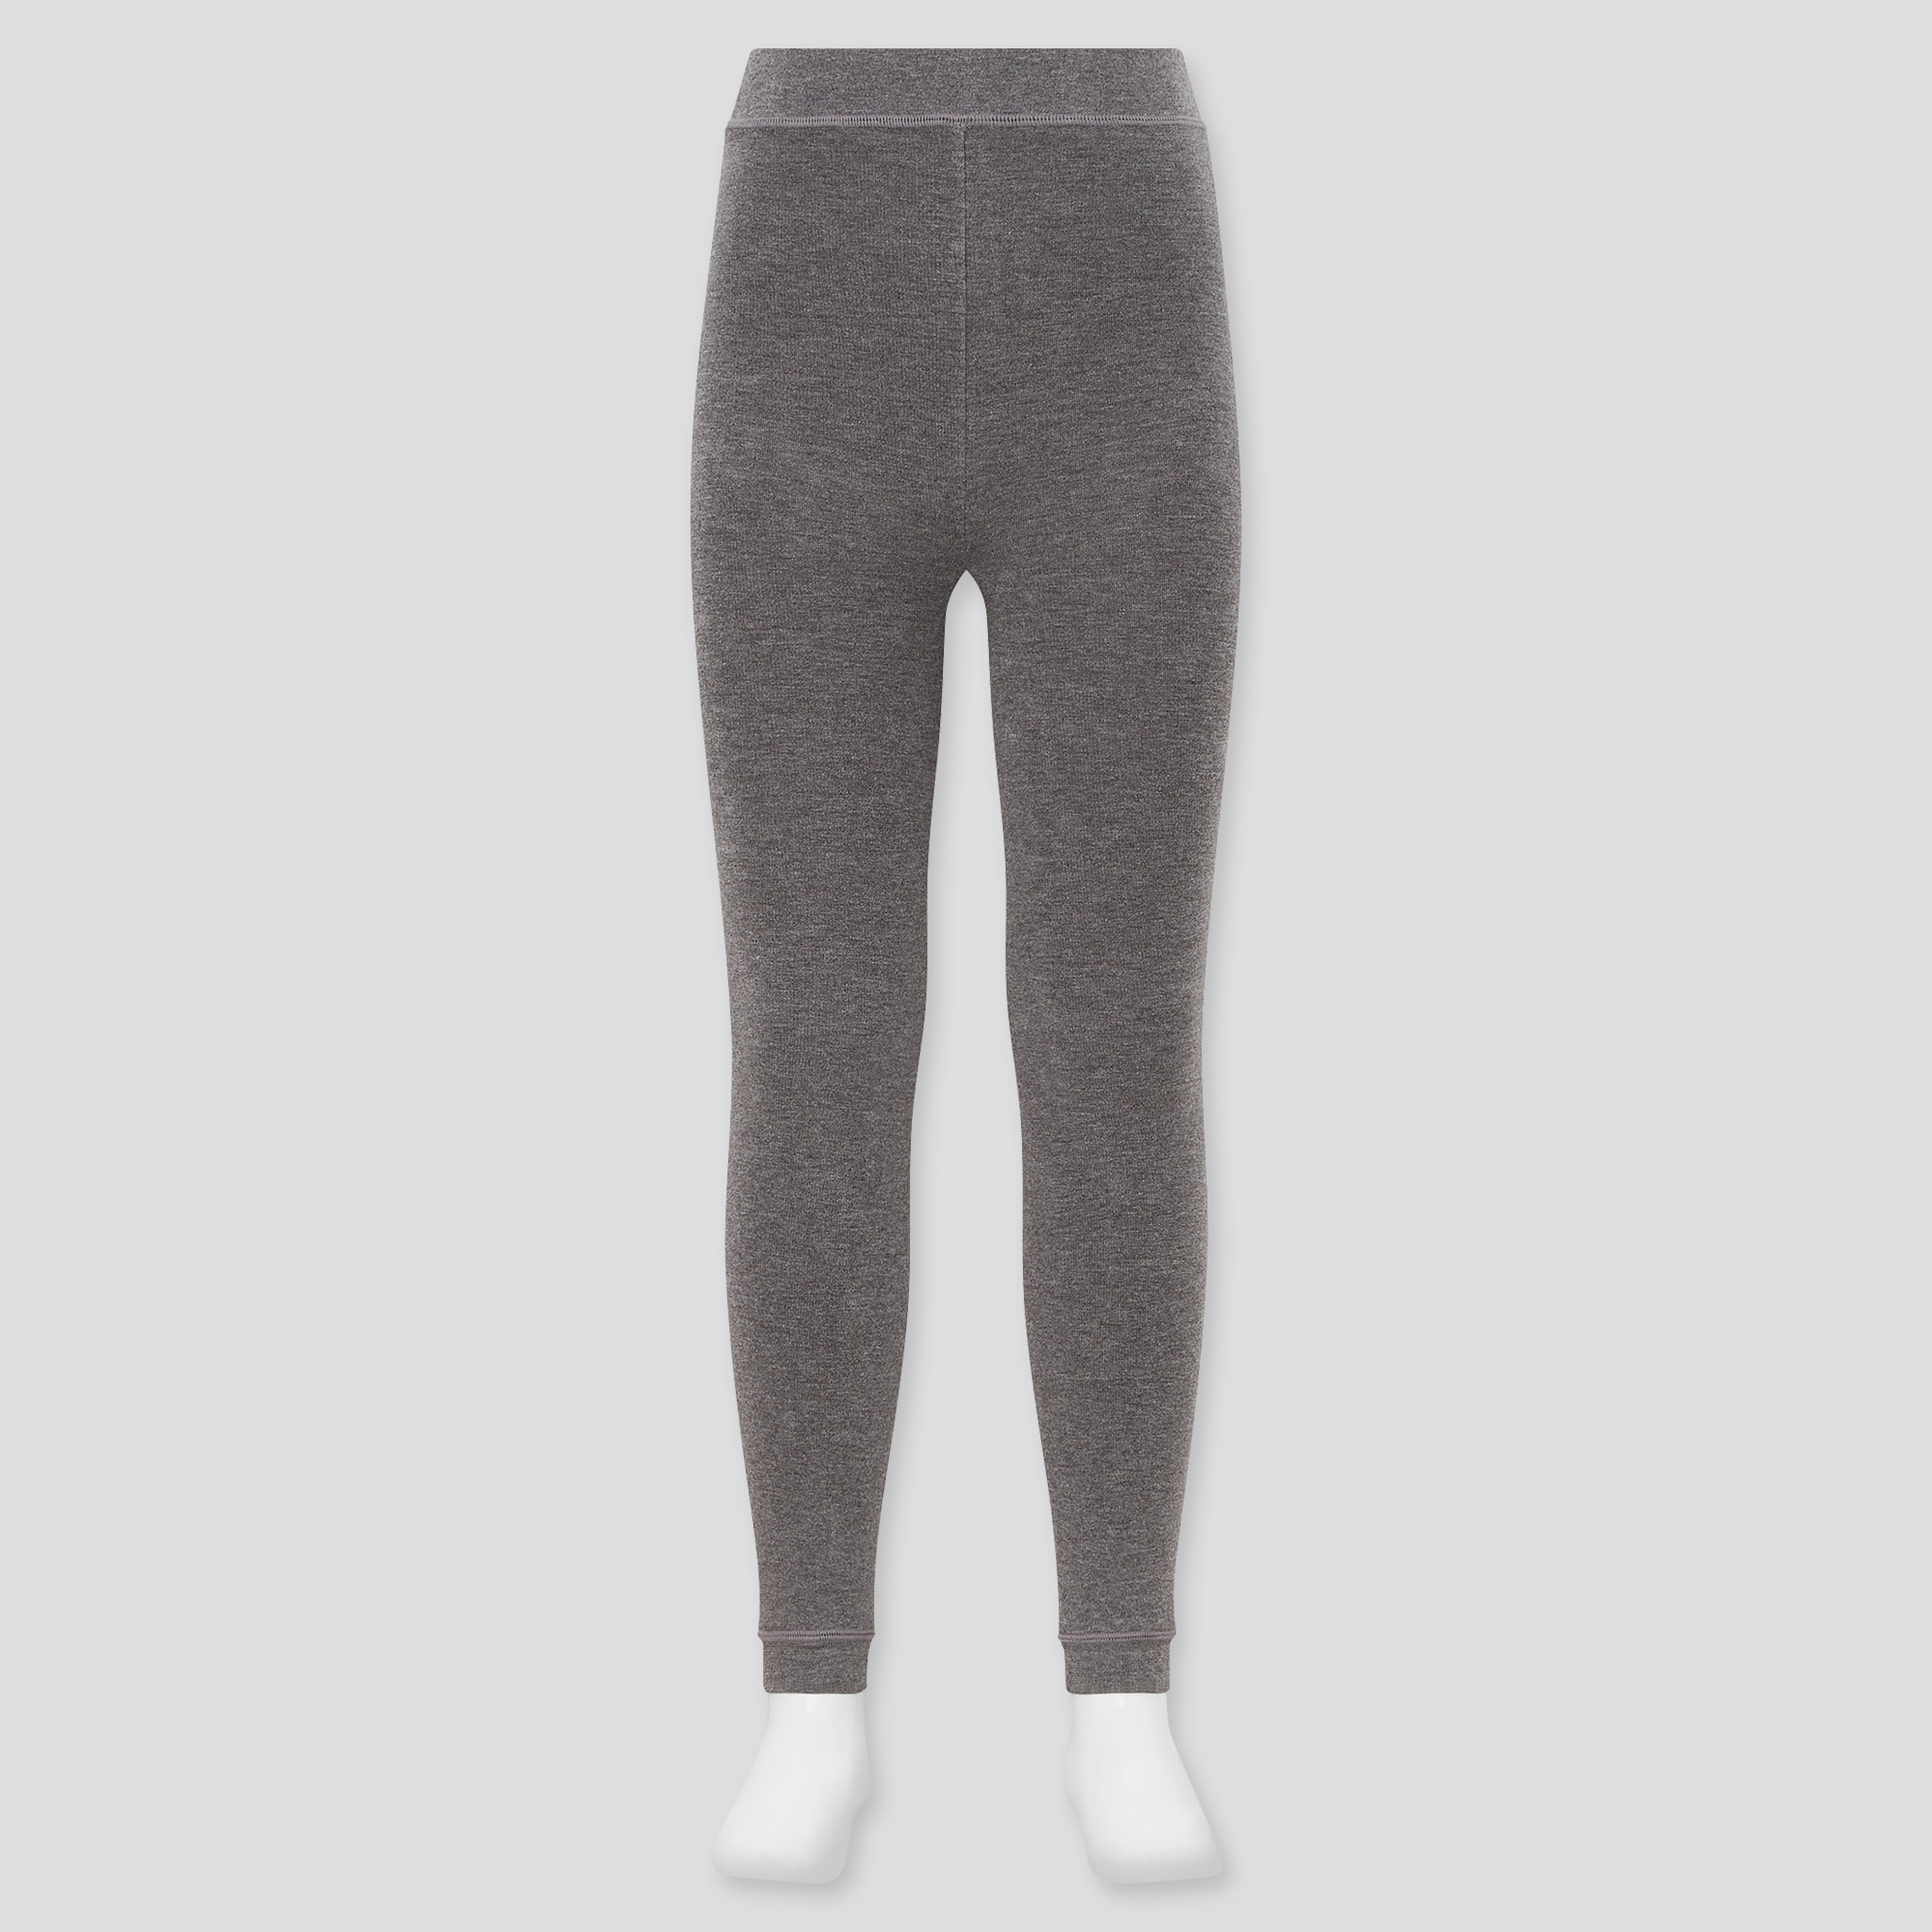 GIRLS HEATTECH Extra Warm Pile Lined Thermal Leggings | UNIQLO UK